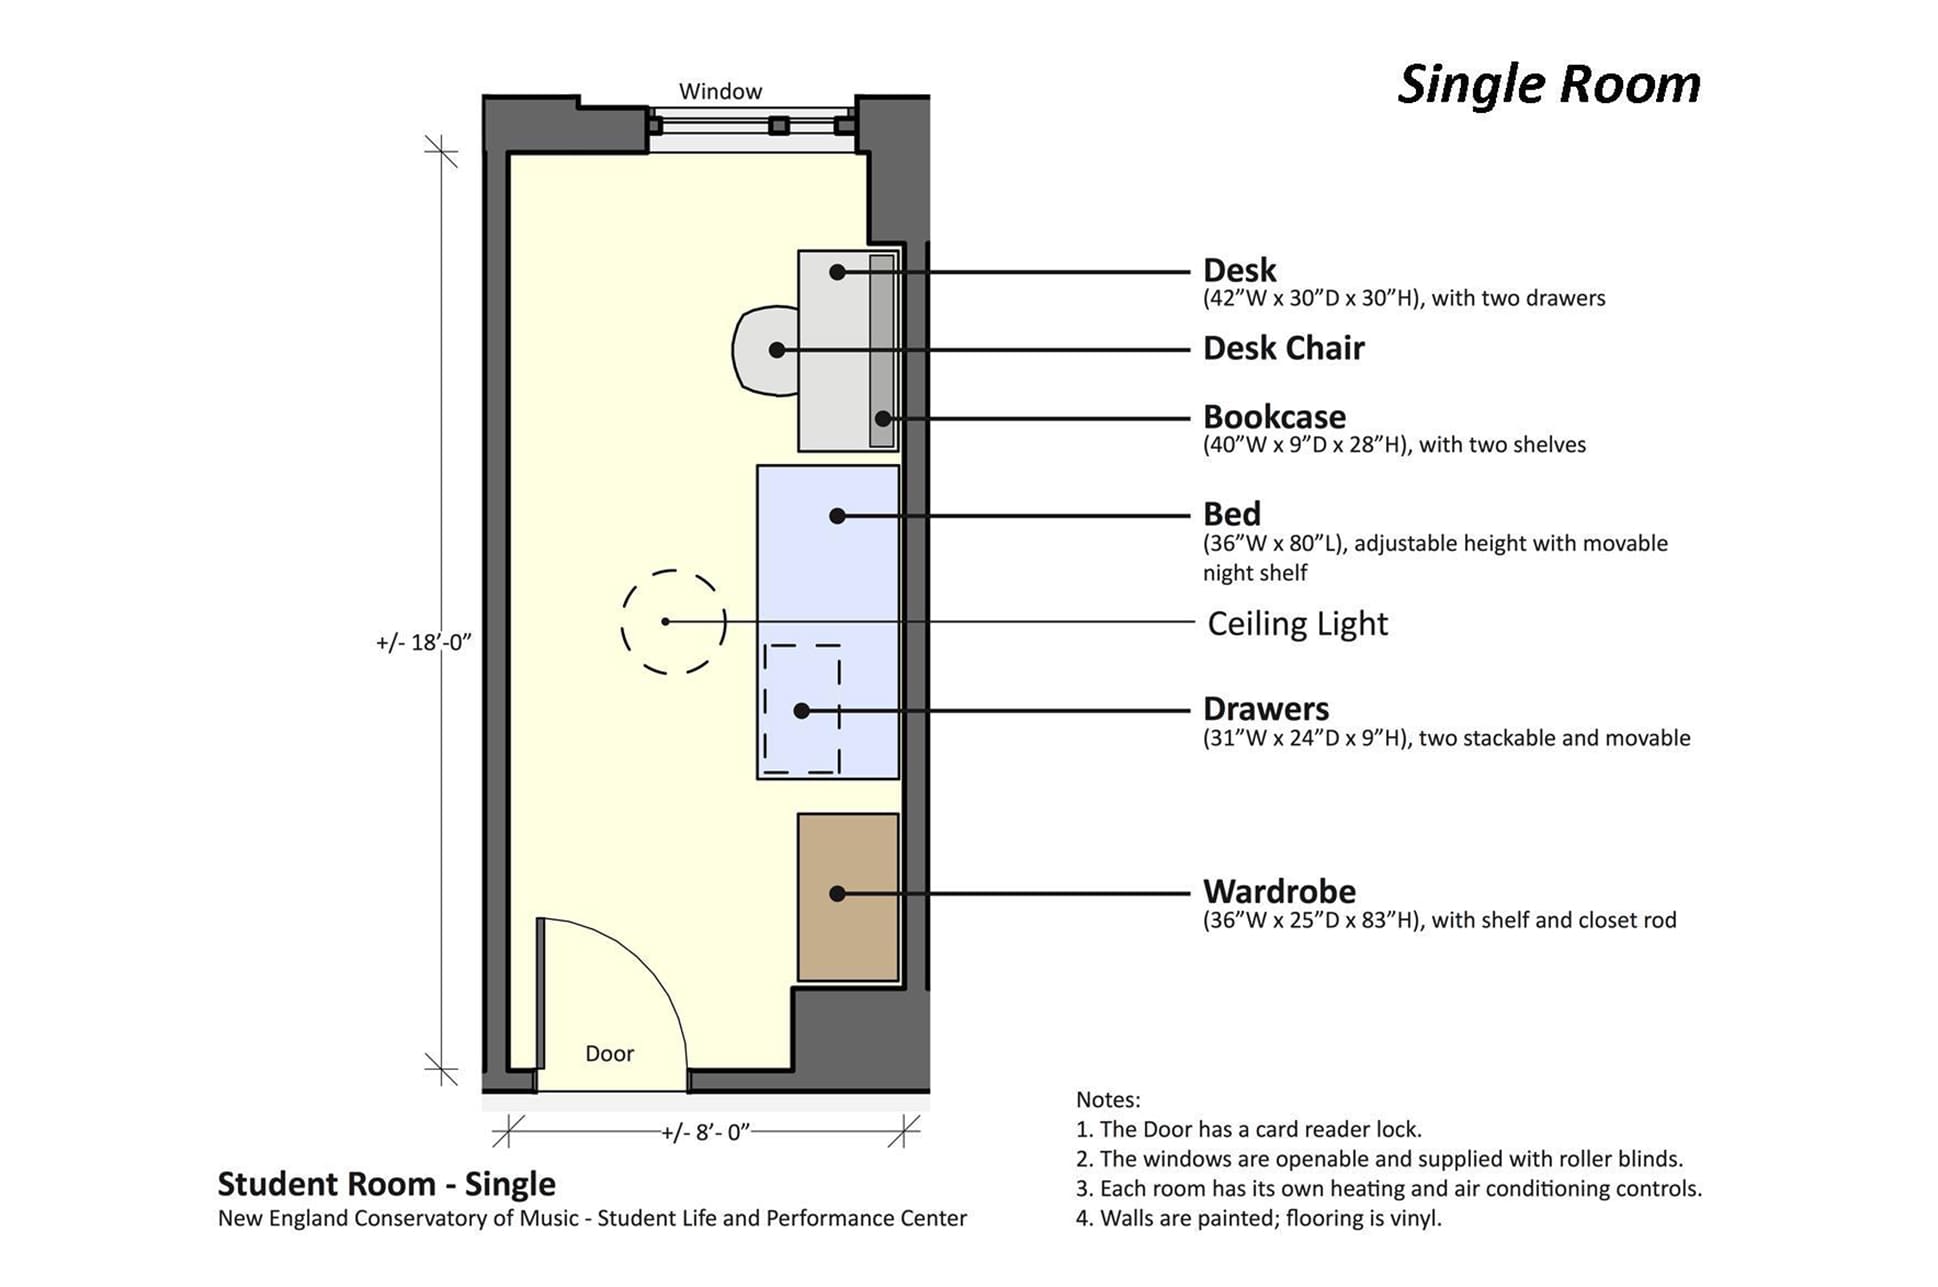 Floor plan diagram of a single residency room in the NEC residence hall.